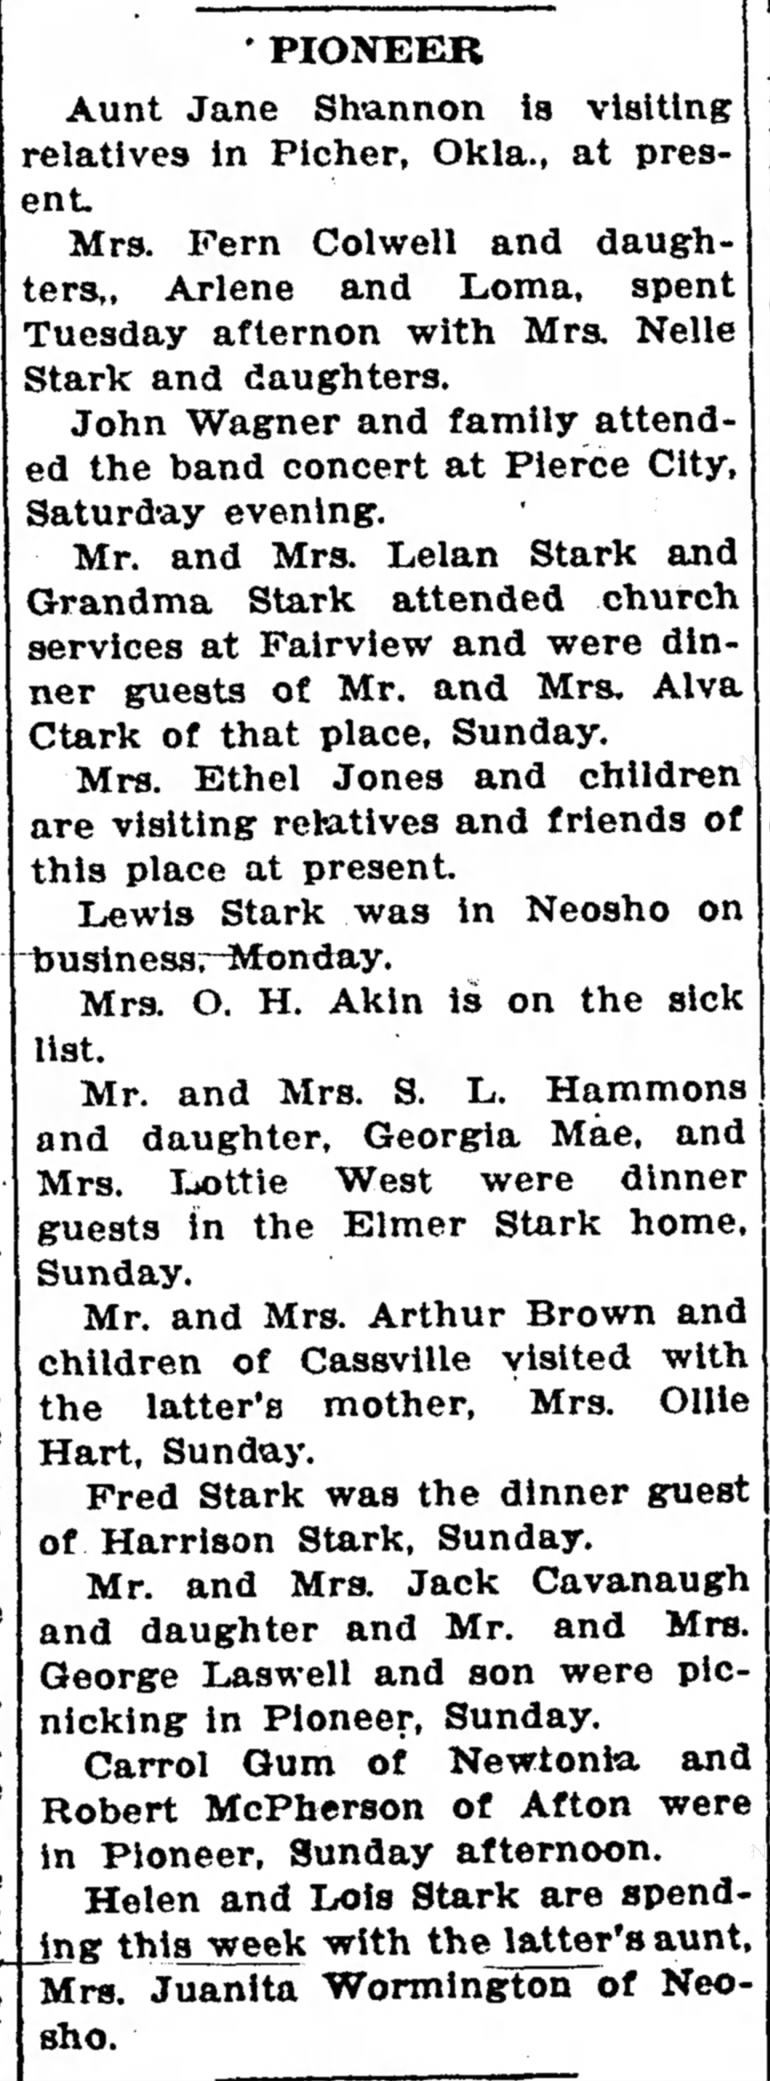 Helen and Lois Stark mentioned in Pioneer News in The Neosho Times, Neosho, Missouri, 11 June 1931